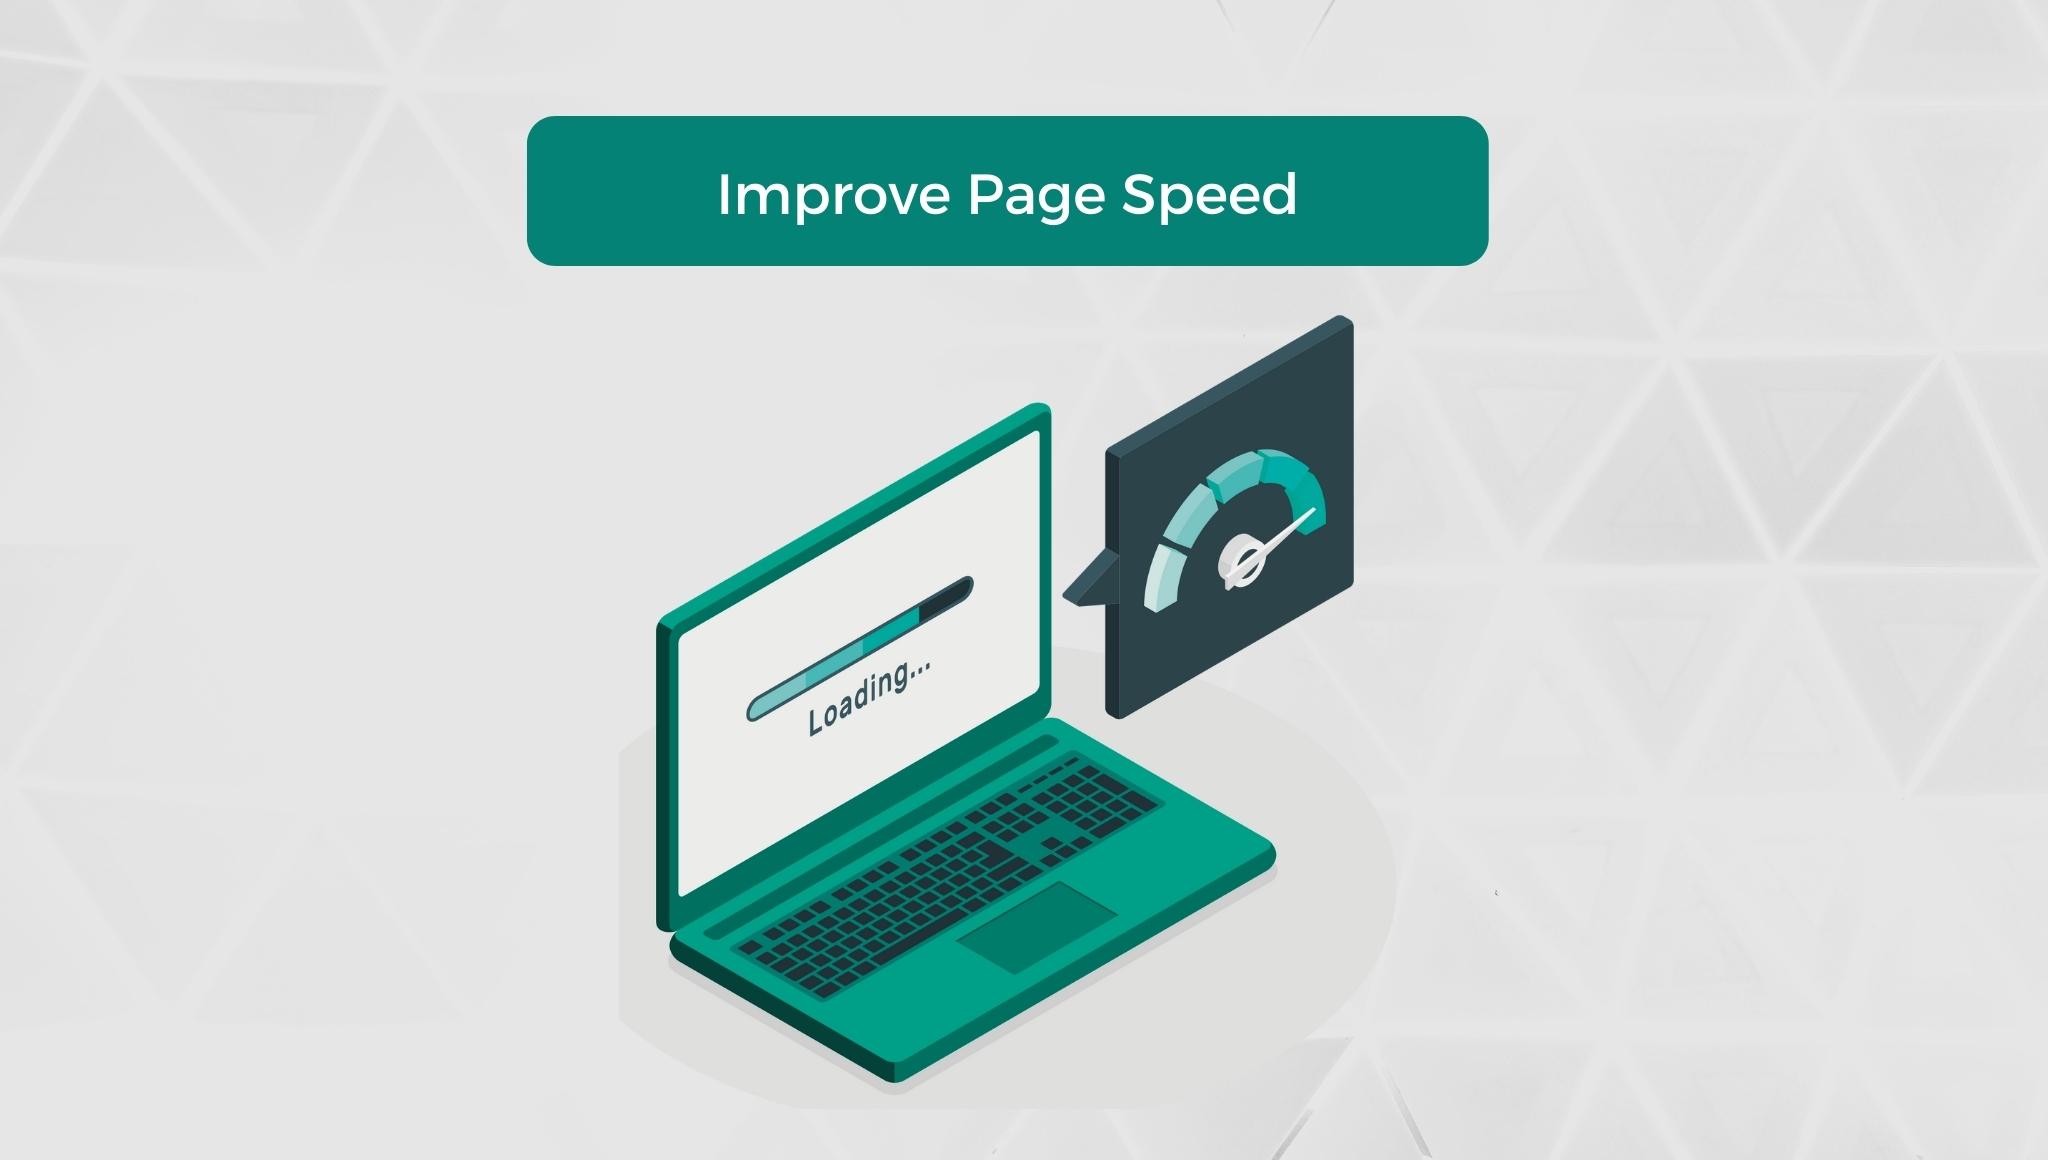  Improve Page Speed